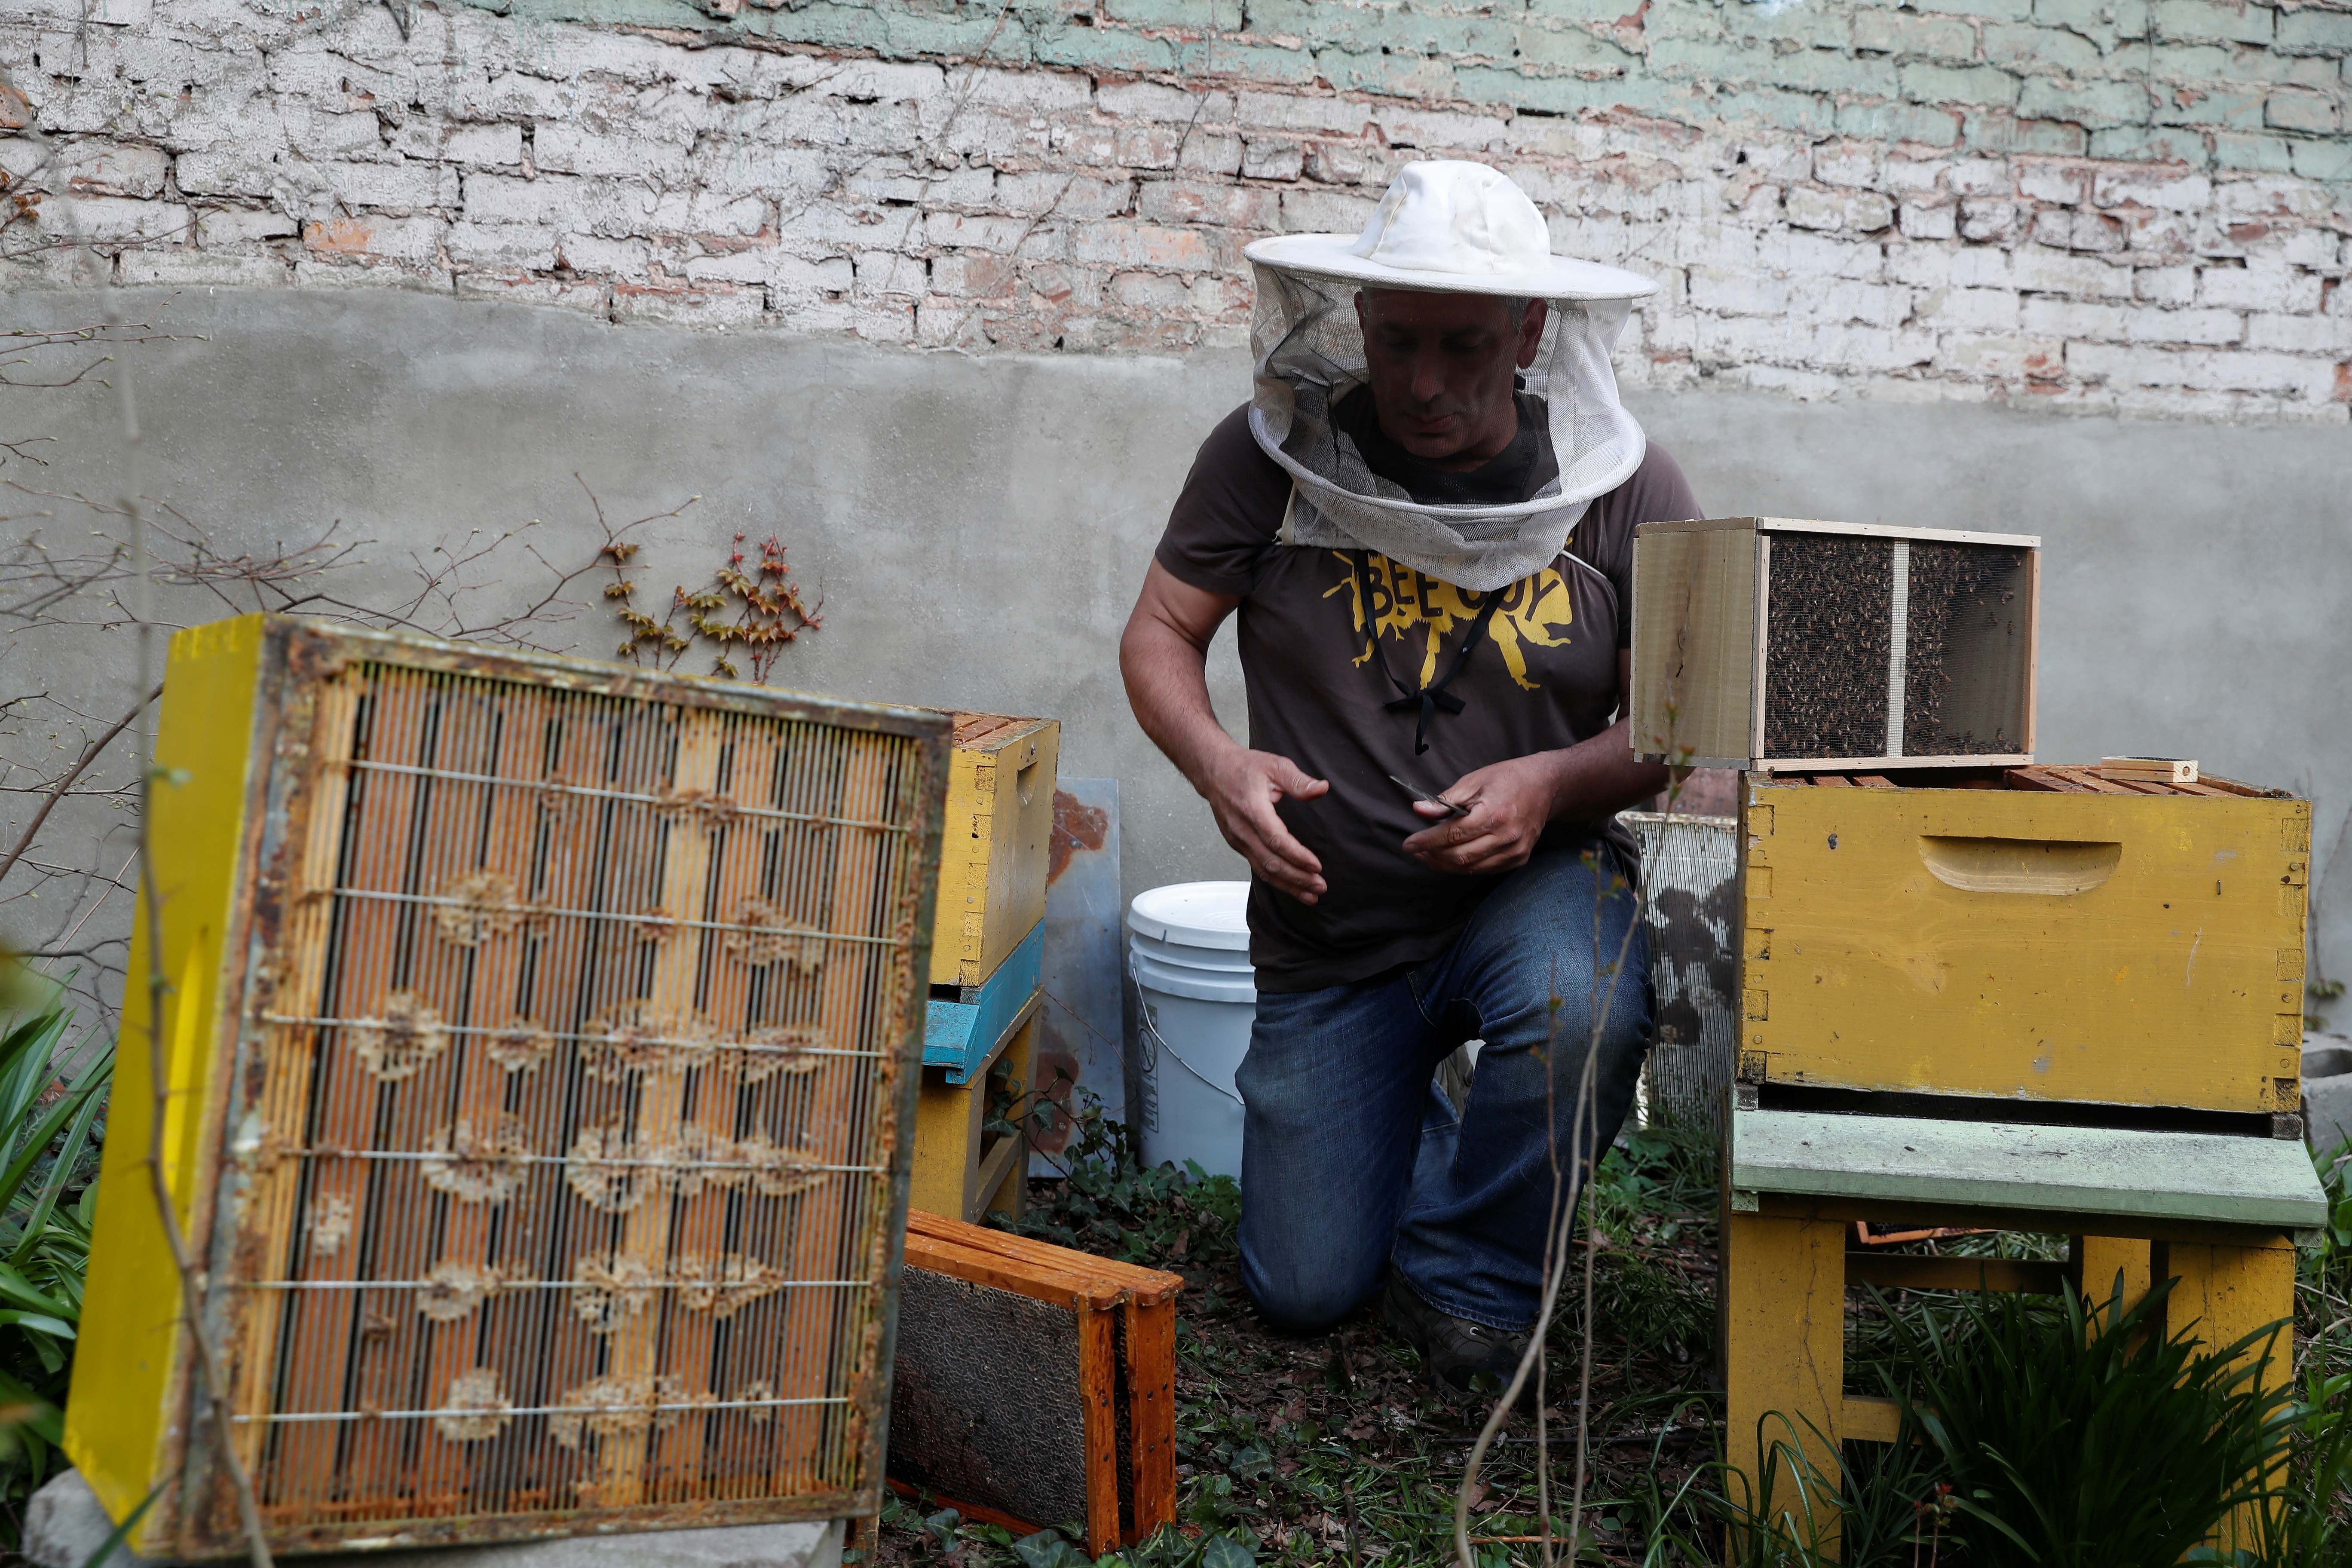 Urban beekeeper Andrew Cote replenishes bee hives at Clinton Community Garden in the Hell’s Kitchen area of New York City